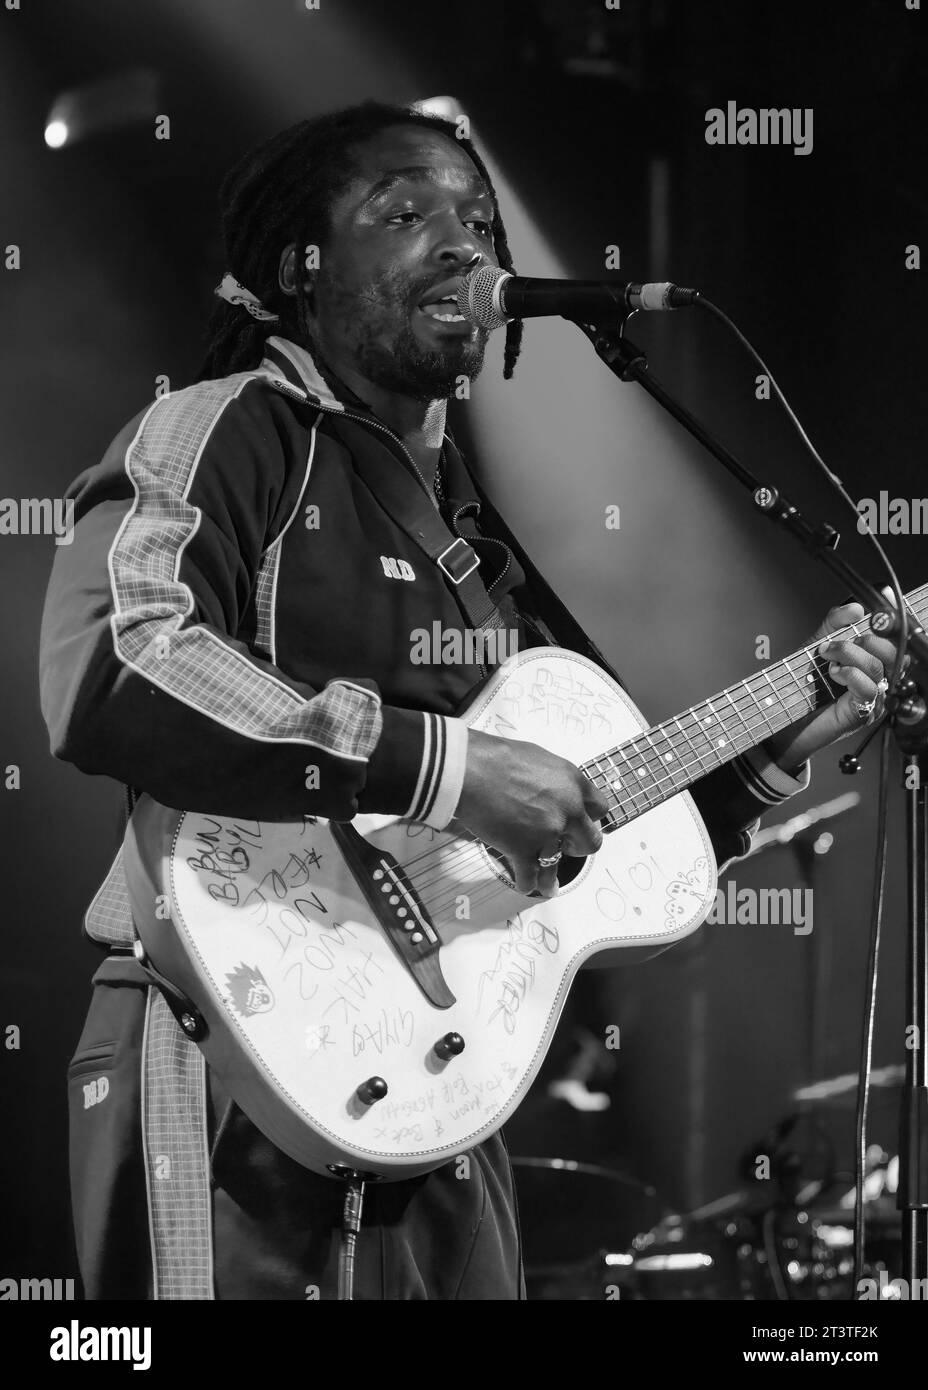 Nottingham, United Kingdom. 26th October 2023, Event: Rock City. “THE STREETS” with Special Guests “HAK BAKER” and “MASTER PEACE”.   PICTURED: HAK BAKER  Credit: Mark Dunn/Alamy Live News (To be included where the image is published). Stock Photo